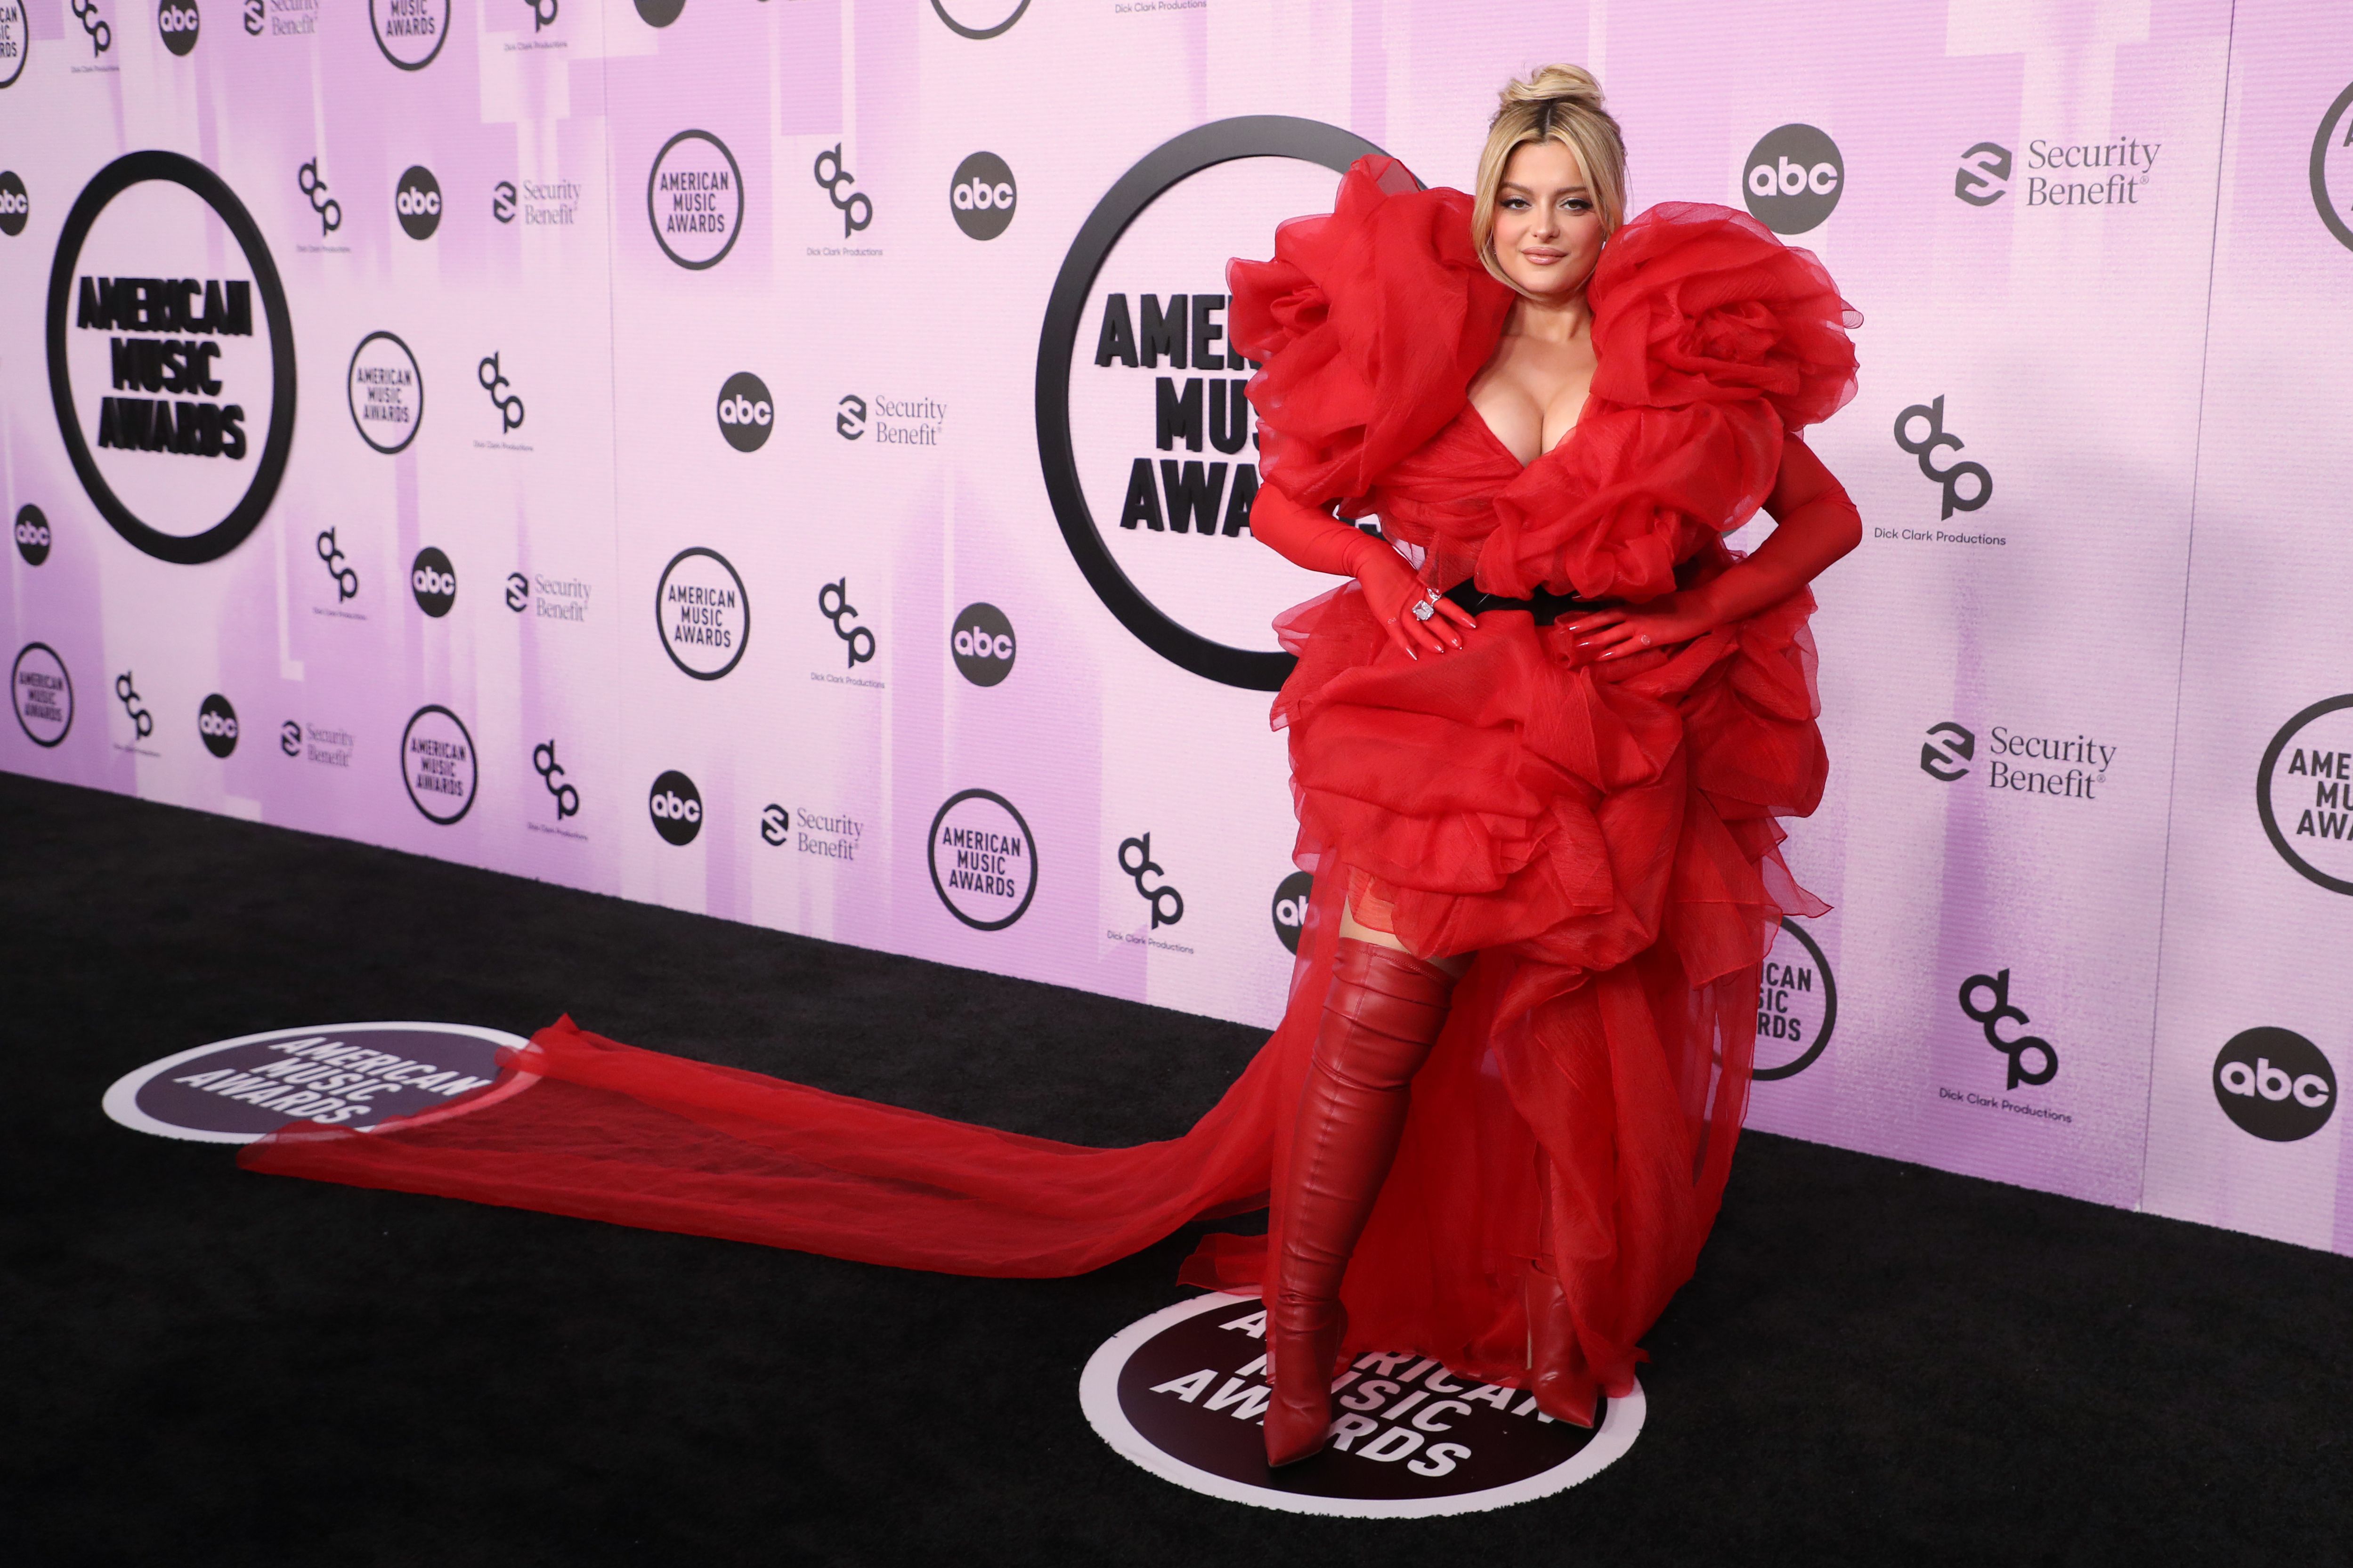 American Music Awards 2021: Arrivals and Red Carpet Photos